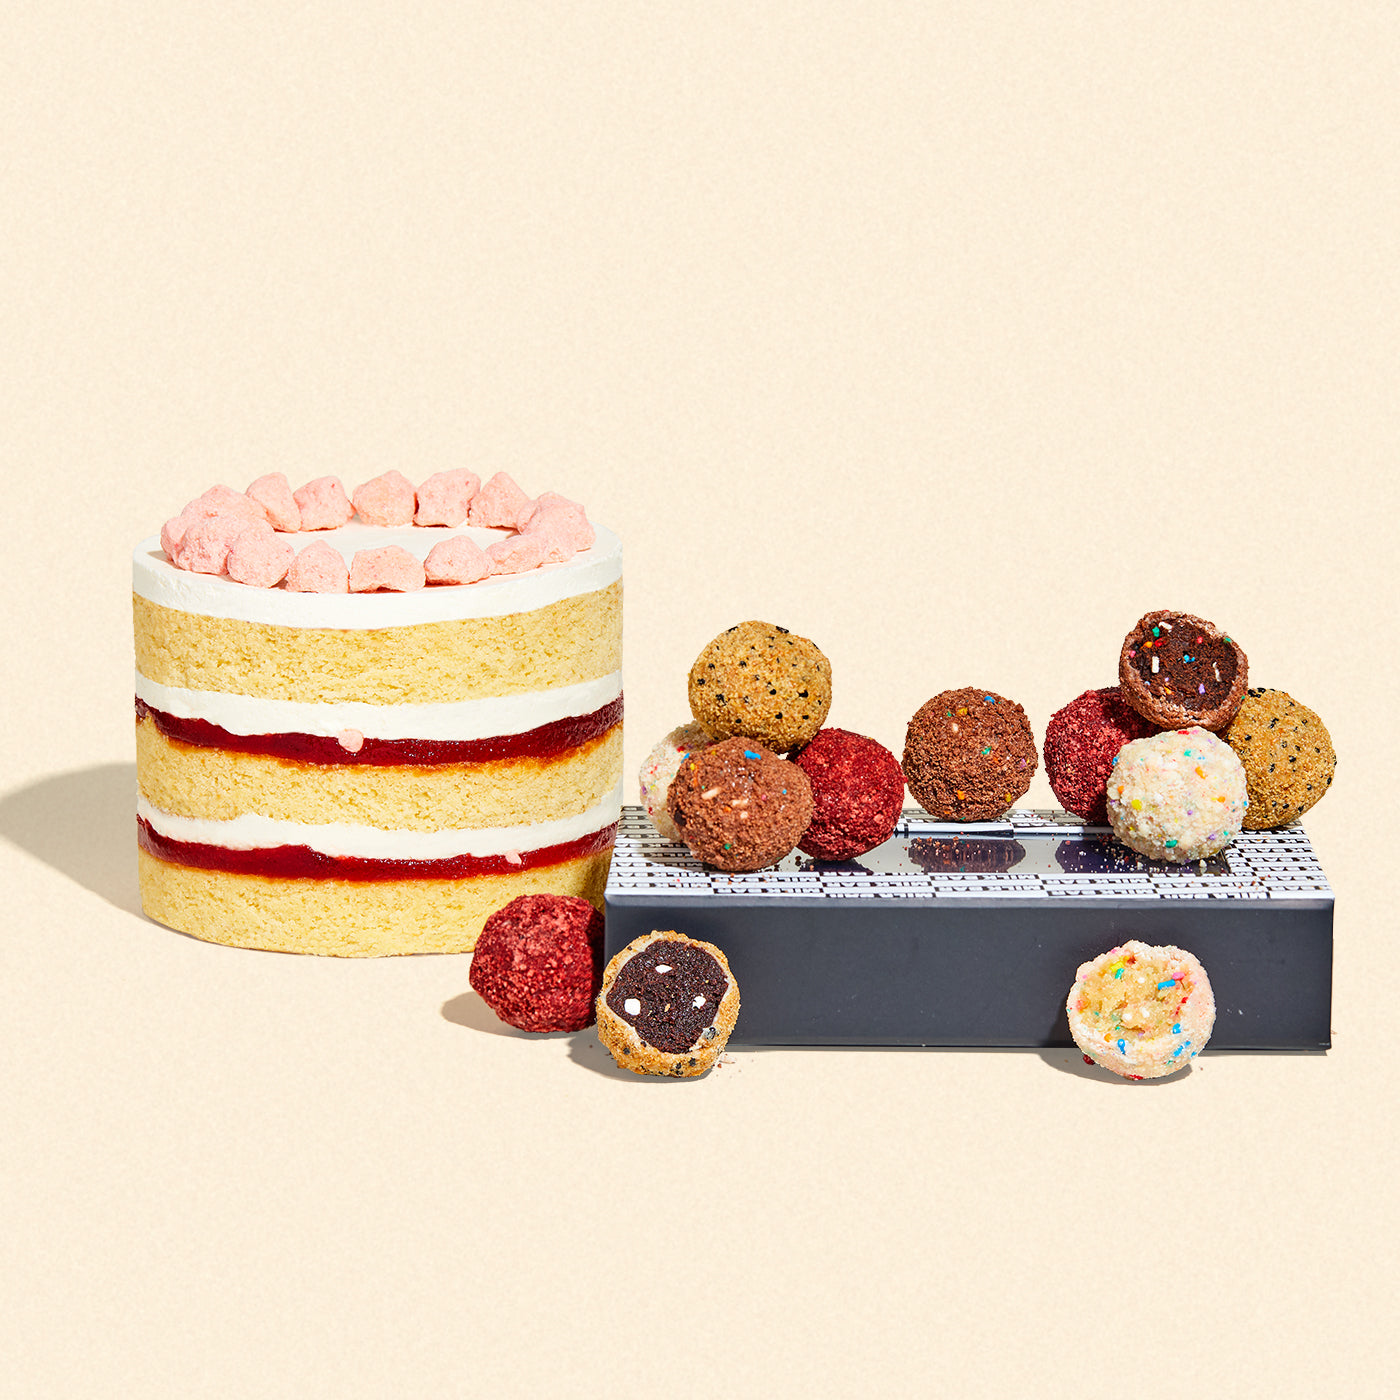 a side view of the limited-time 6 inch strawberry shortcake cake beside a dozen gift box of assorted truffles.